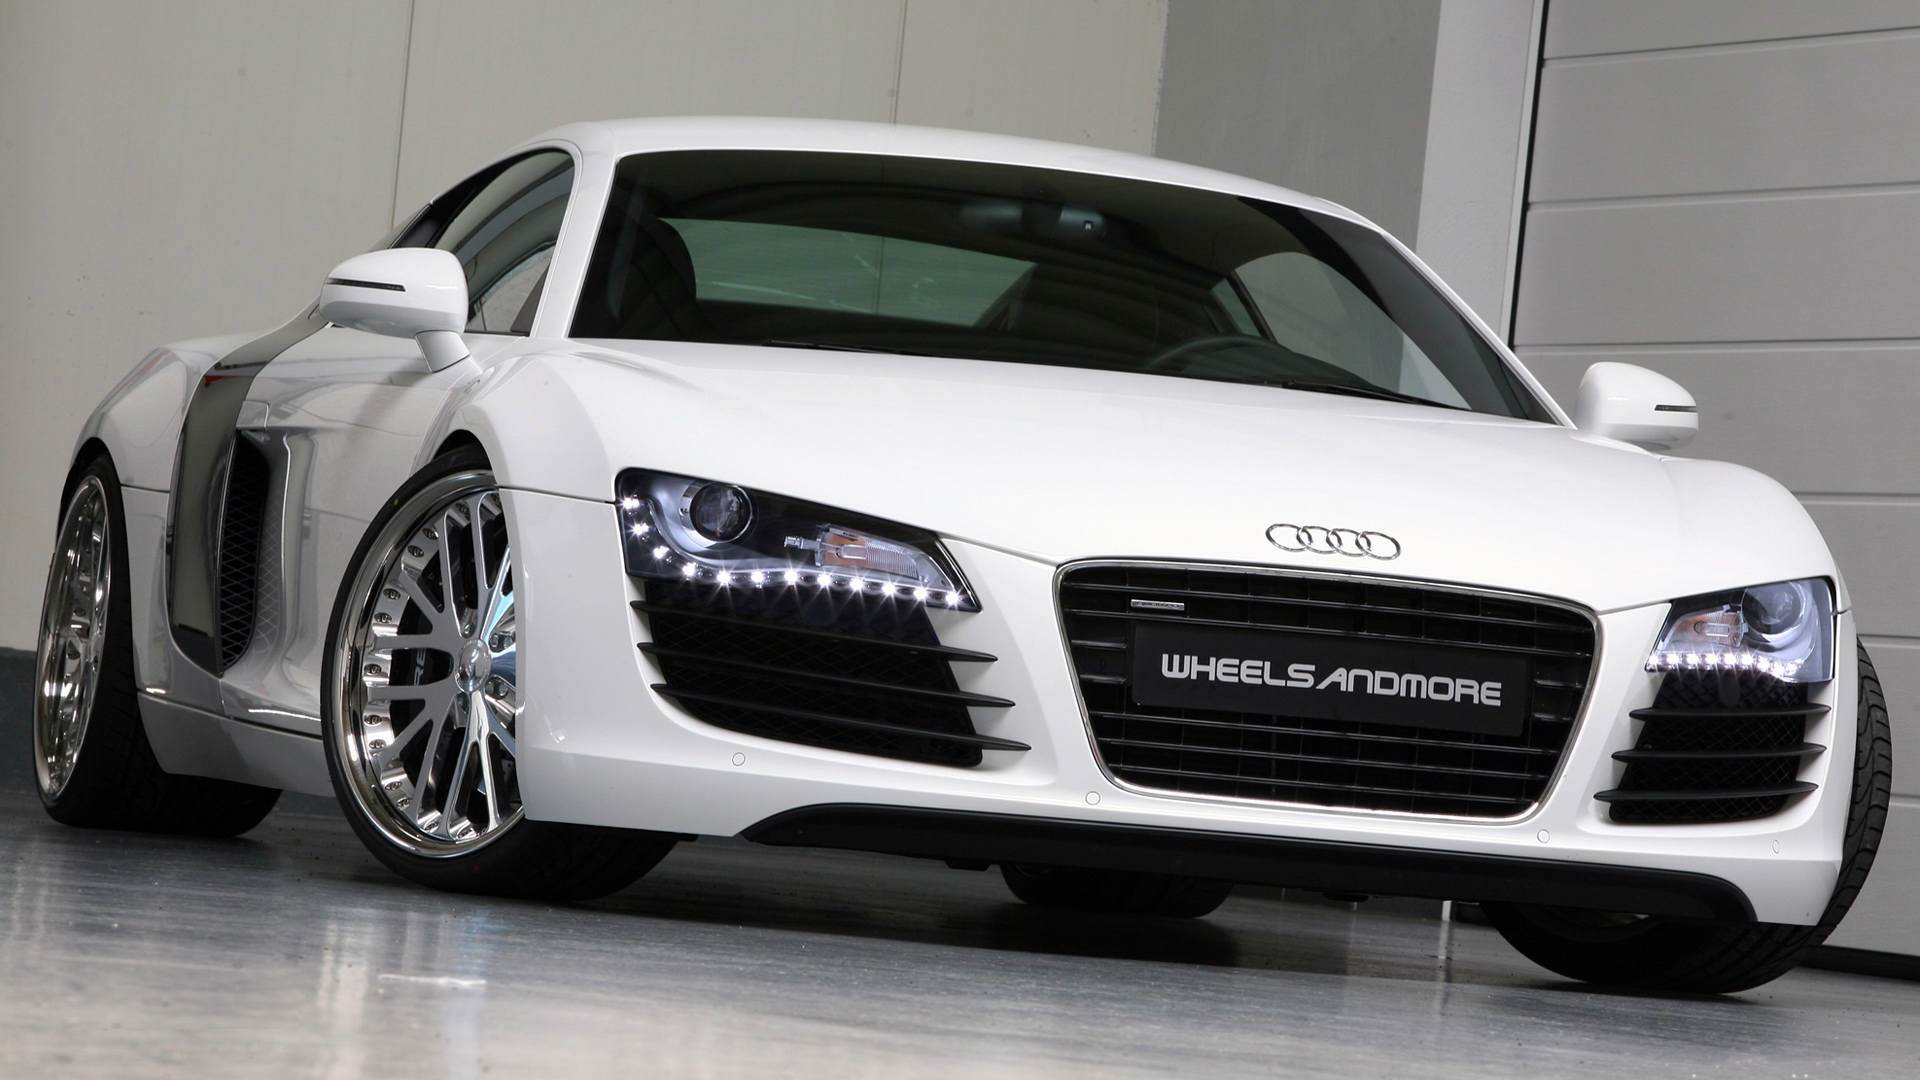 Free Download Audi Cars Hd Wallpapers 1920x1080 For Your Desktop Mobile Tablet Explore 94 Audi R9 Wallpapers Audi R9 Wallpapers R9 Wallpaper Audi